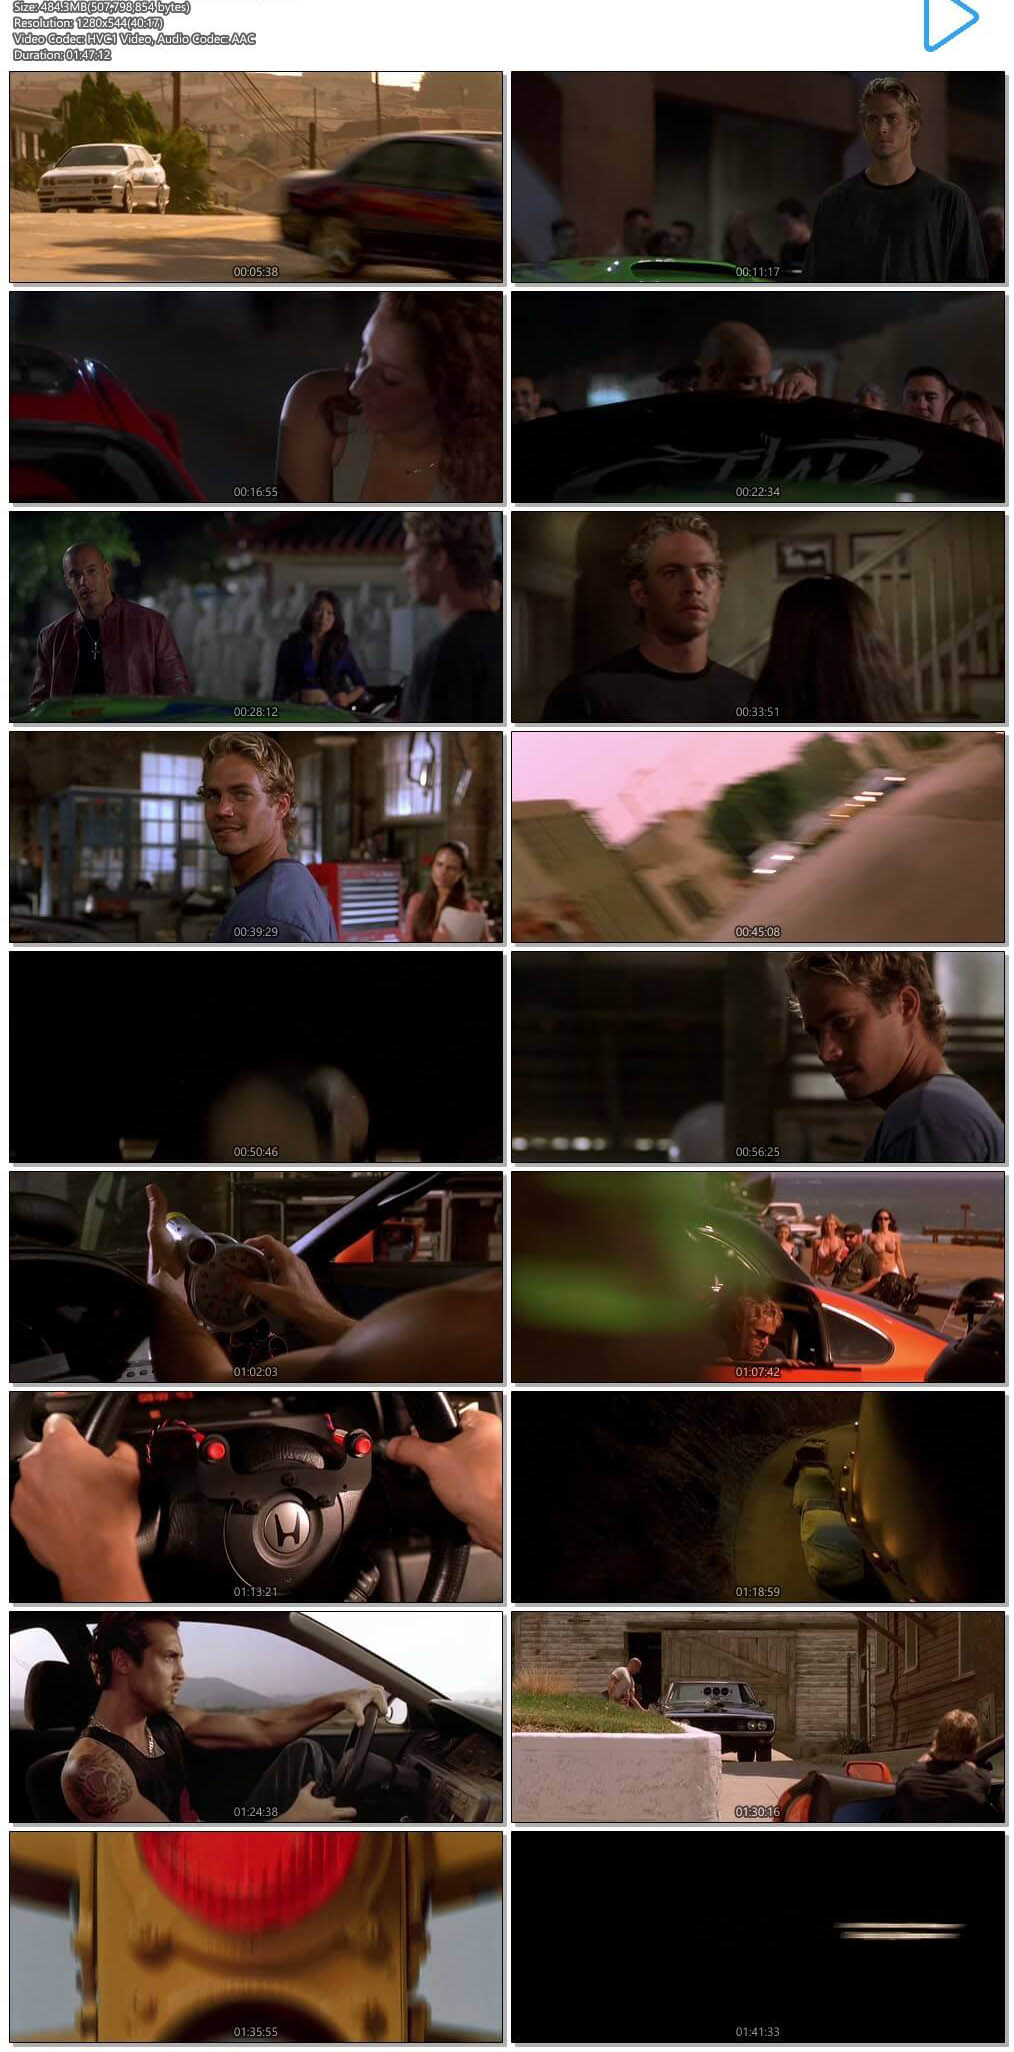 The Fast and the Furious (2001) 720p BRRip x265 HEVC Dual Audio Eng Hindi-DLW